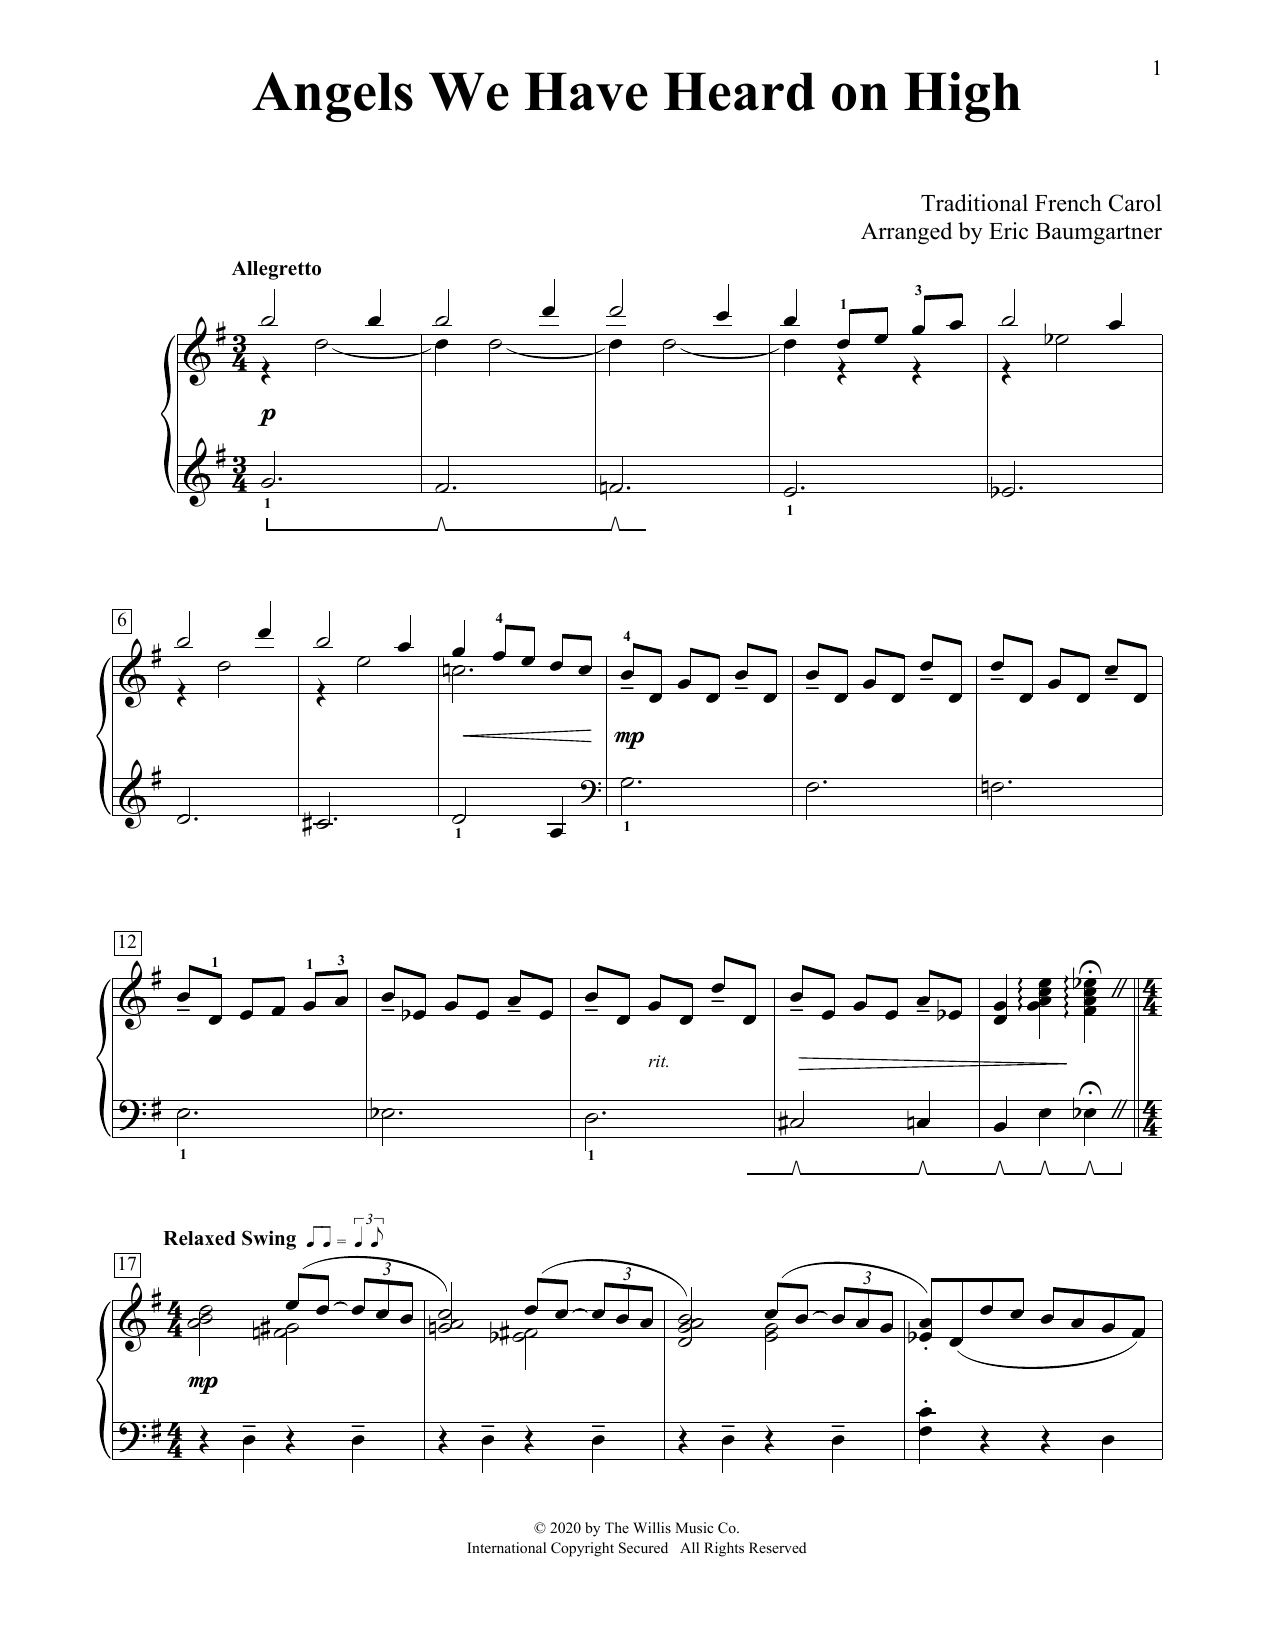 Download Traditional French Carol Angels We Have Heard On High [Jazz vers Sheet Music